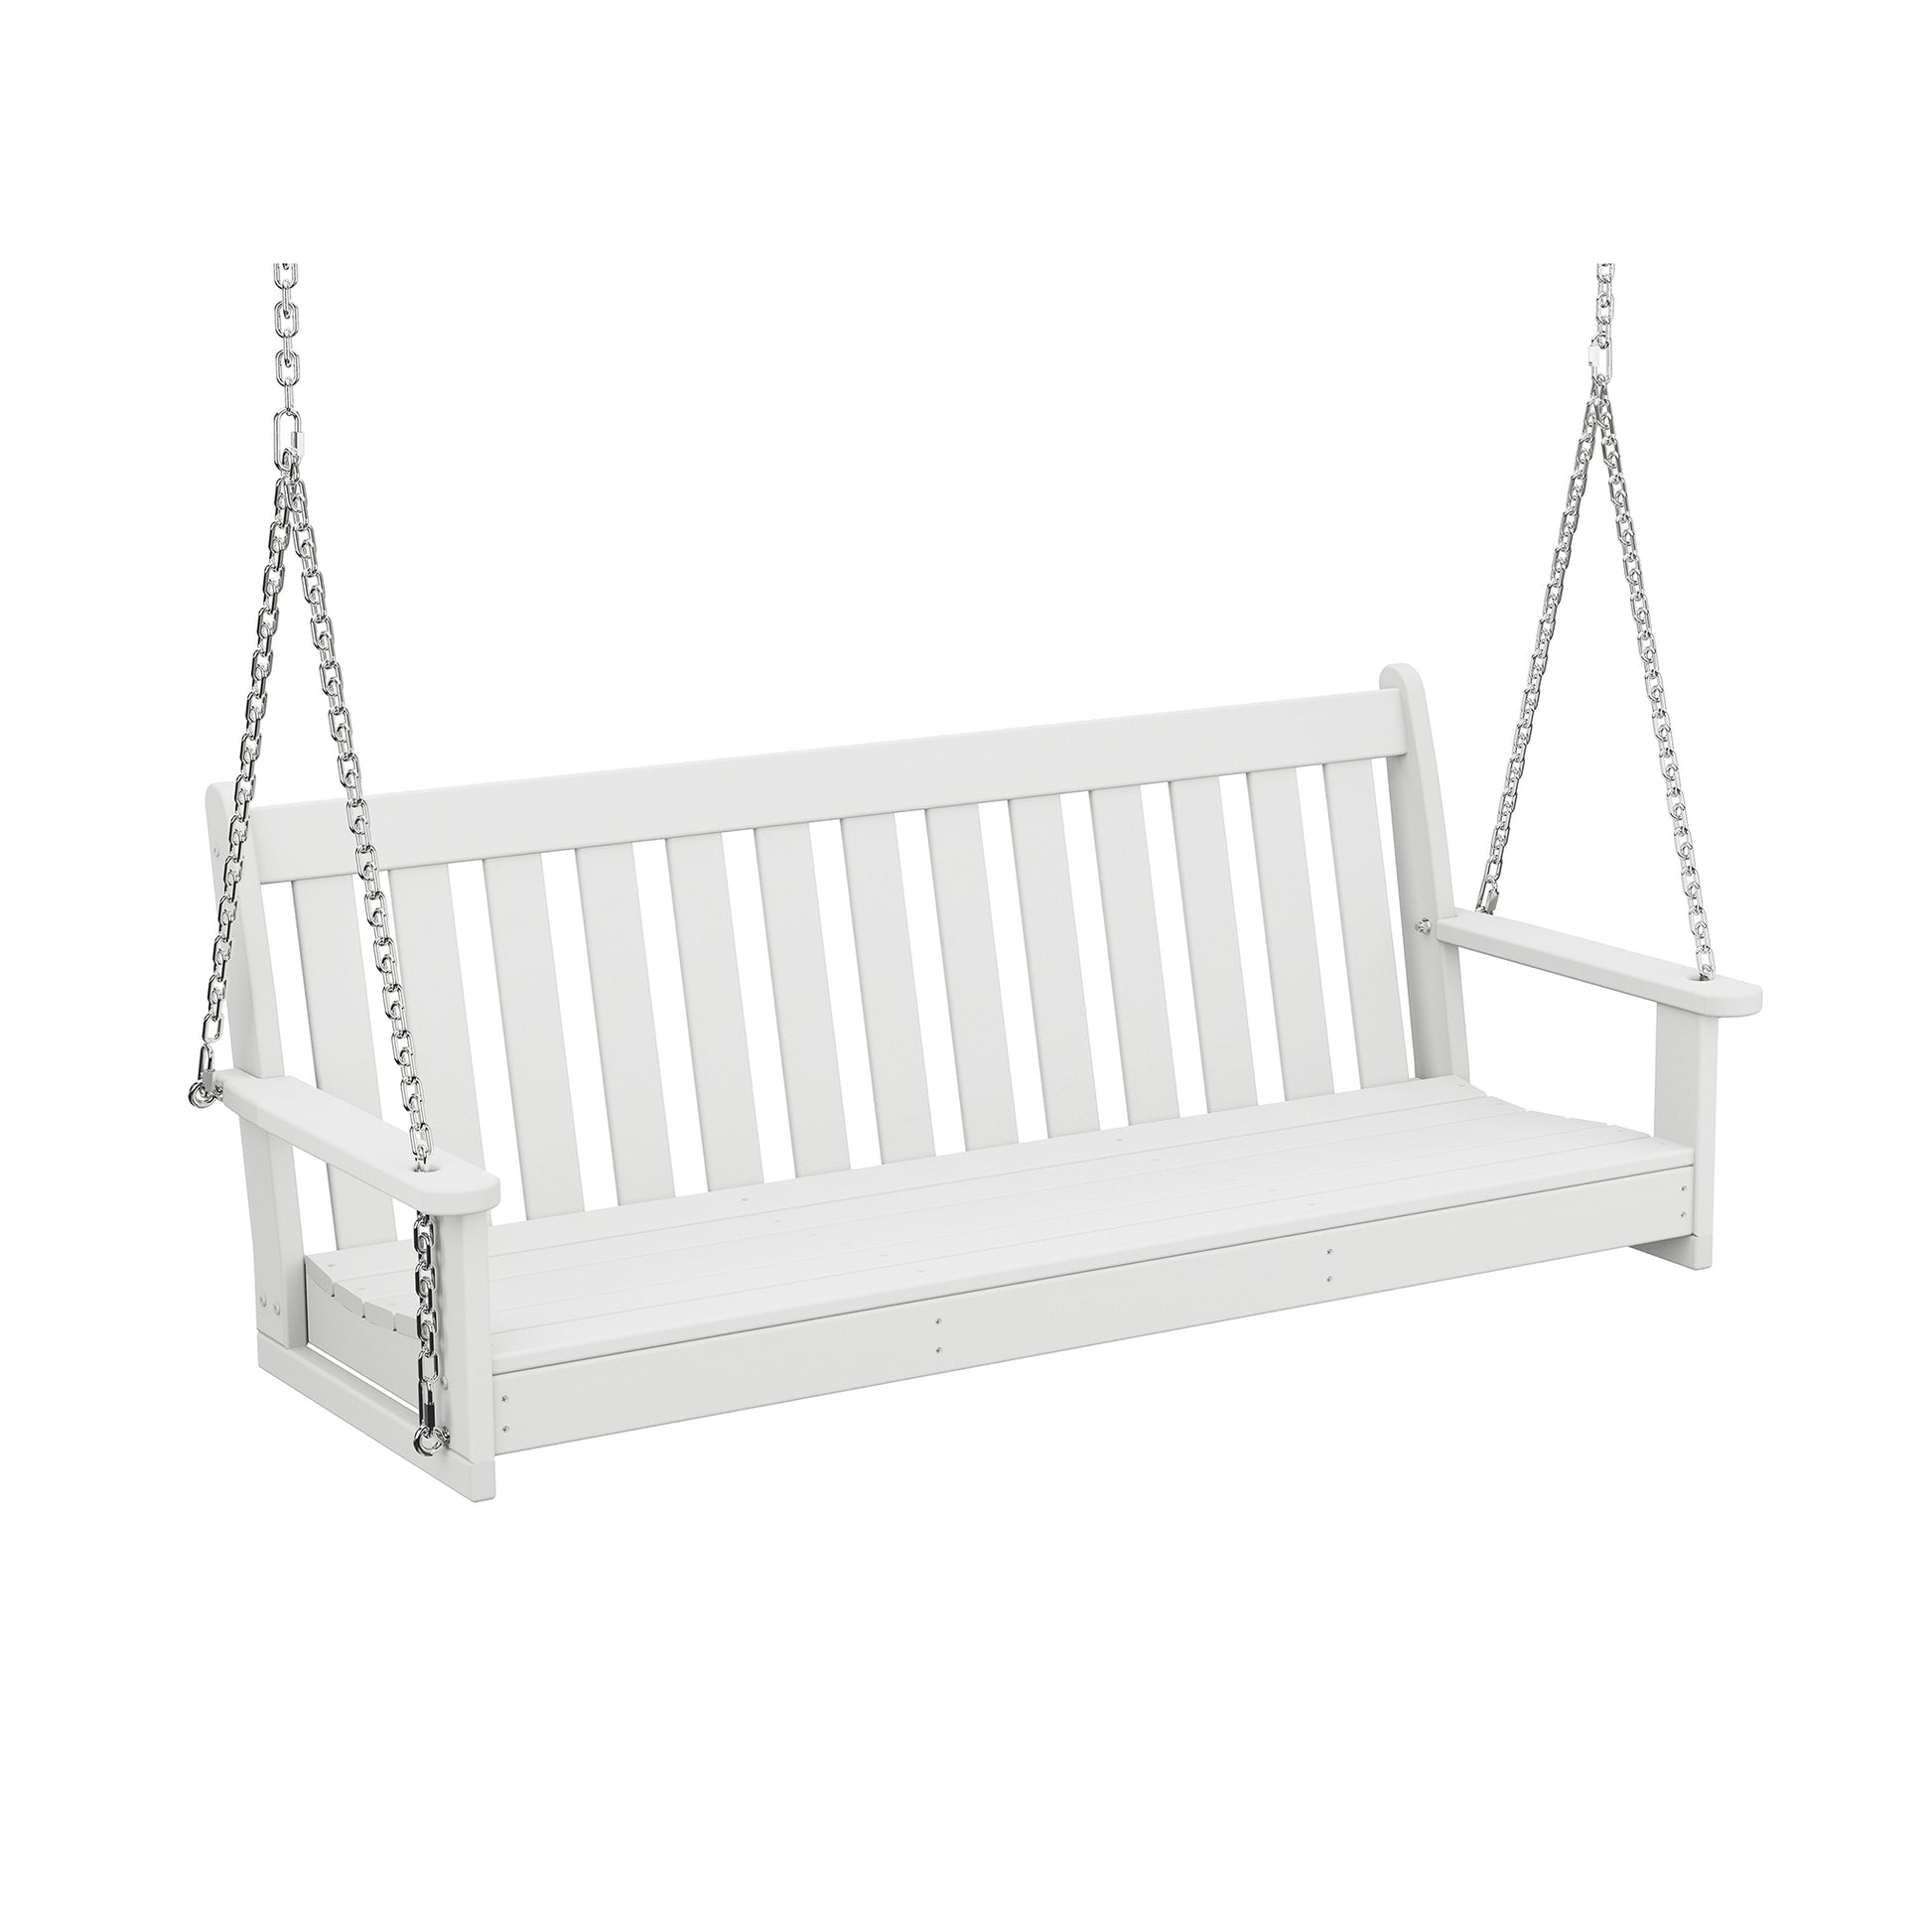 A white POLYWOOD® Vineyard 60" porch swing suspended by chains, featuring a slatted back and seat, with armrests on both sides, displayed against a white background.